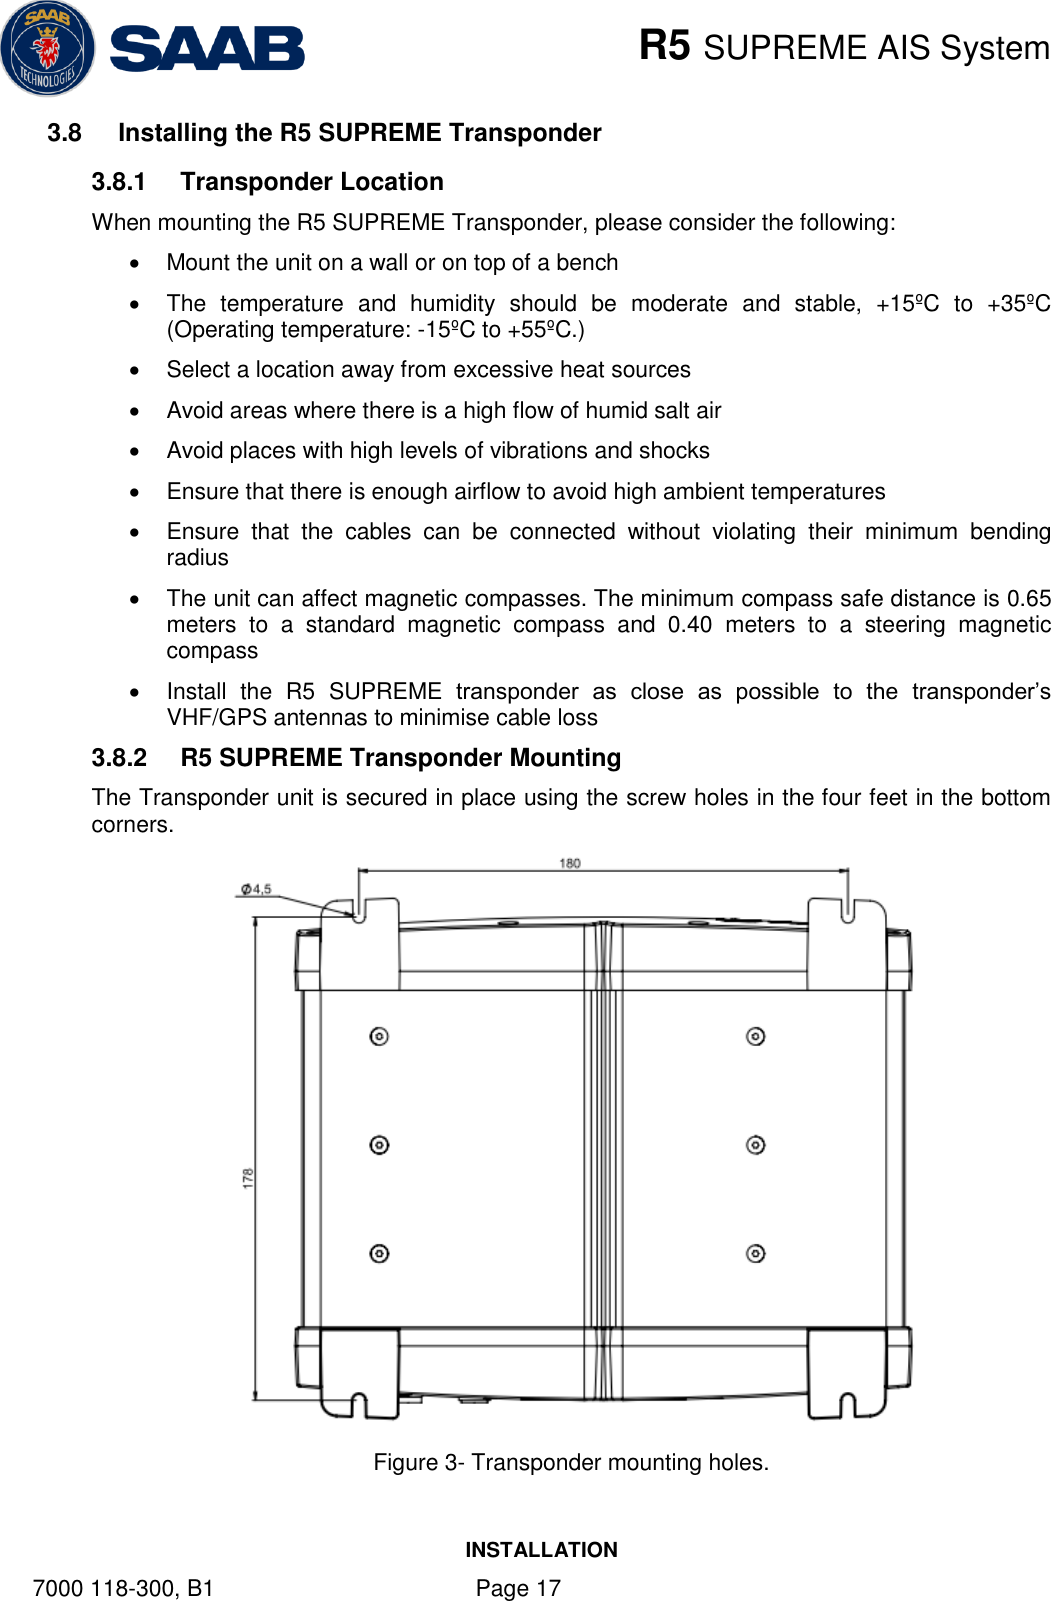    R5 SUPREME AIS System INSTALLATION 7000 118-300, B1    Page 17 3.8  Installing the R5 SUPREME Transponder 3.8.1  Transponder Location When mounting the R5 SUPREME Transponder, please consider the following:   Mount the unit on a wall or on top of a bench   The  temperature  and  humidity  should  be  moderate  and  stable,  +15ºC  to  +35ºC (Operating temperature: -15ºC to +55ºC.)   Select a location away from excessive heat sources   Avoid areas where there is a high flow of humid salt air   Avoid places with high levels of vibrations and shocks   Ensure that there is enough airflow to avoid high ambient temperatures   Ensure  that  the  cables  can  be  connected  without  violating  their  minimum  bending radius    The unit can affect magnetic compasses. The minimum compass safe distance is 0.65 meters  to  a  standard  magnetic  compass  and  0.40  meters  to  a  steering  magnetic compass   Install  the  R5  SUPREME  transponder  as  close  as  possible  to  the  transponder’s VHF/GPS antennas to minimise cable loss 3.8.2  R5 SUPREME Transponder Mounting The Transponder unit is secured in place using the screw holes in the four feet in the bottom corners.  Figure 3- Transponder mounting holes.   